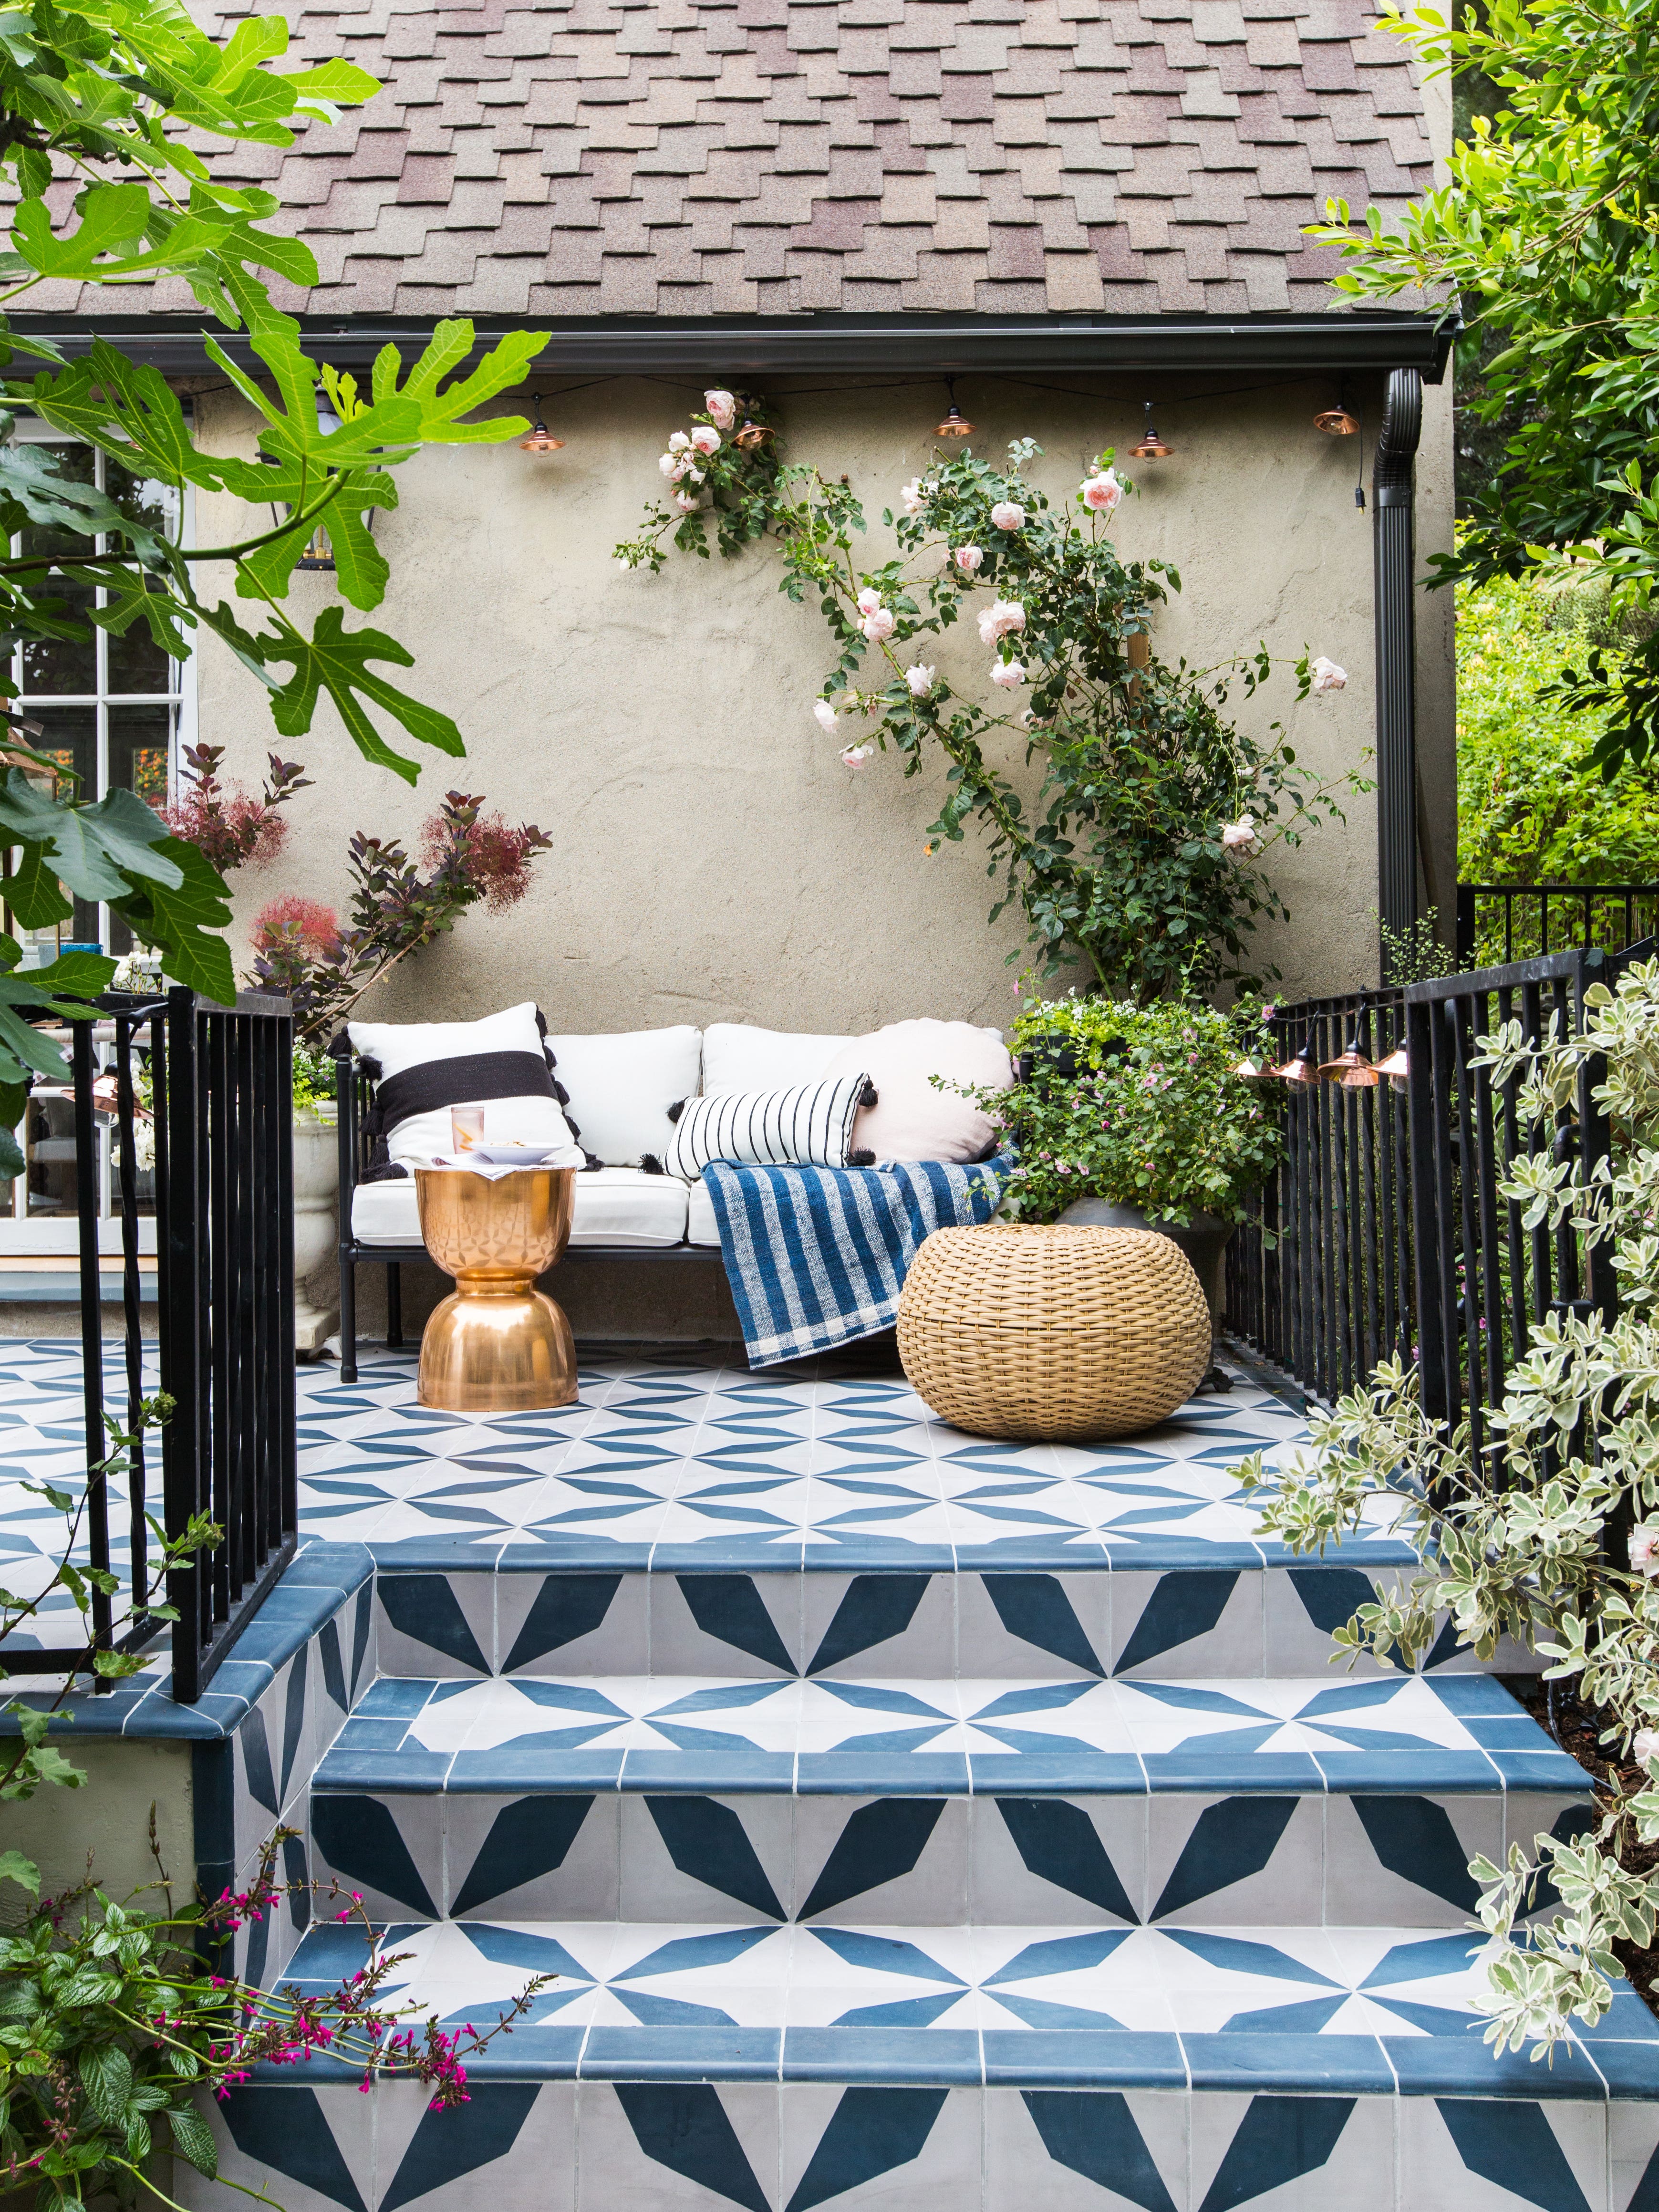 7 Outdoor Patio Ideas That Give This Underrated Space Its Due